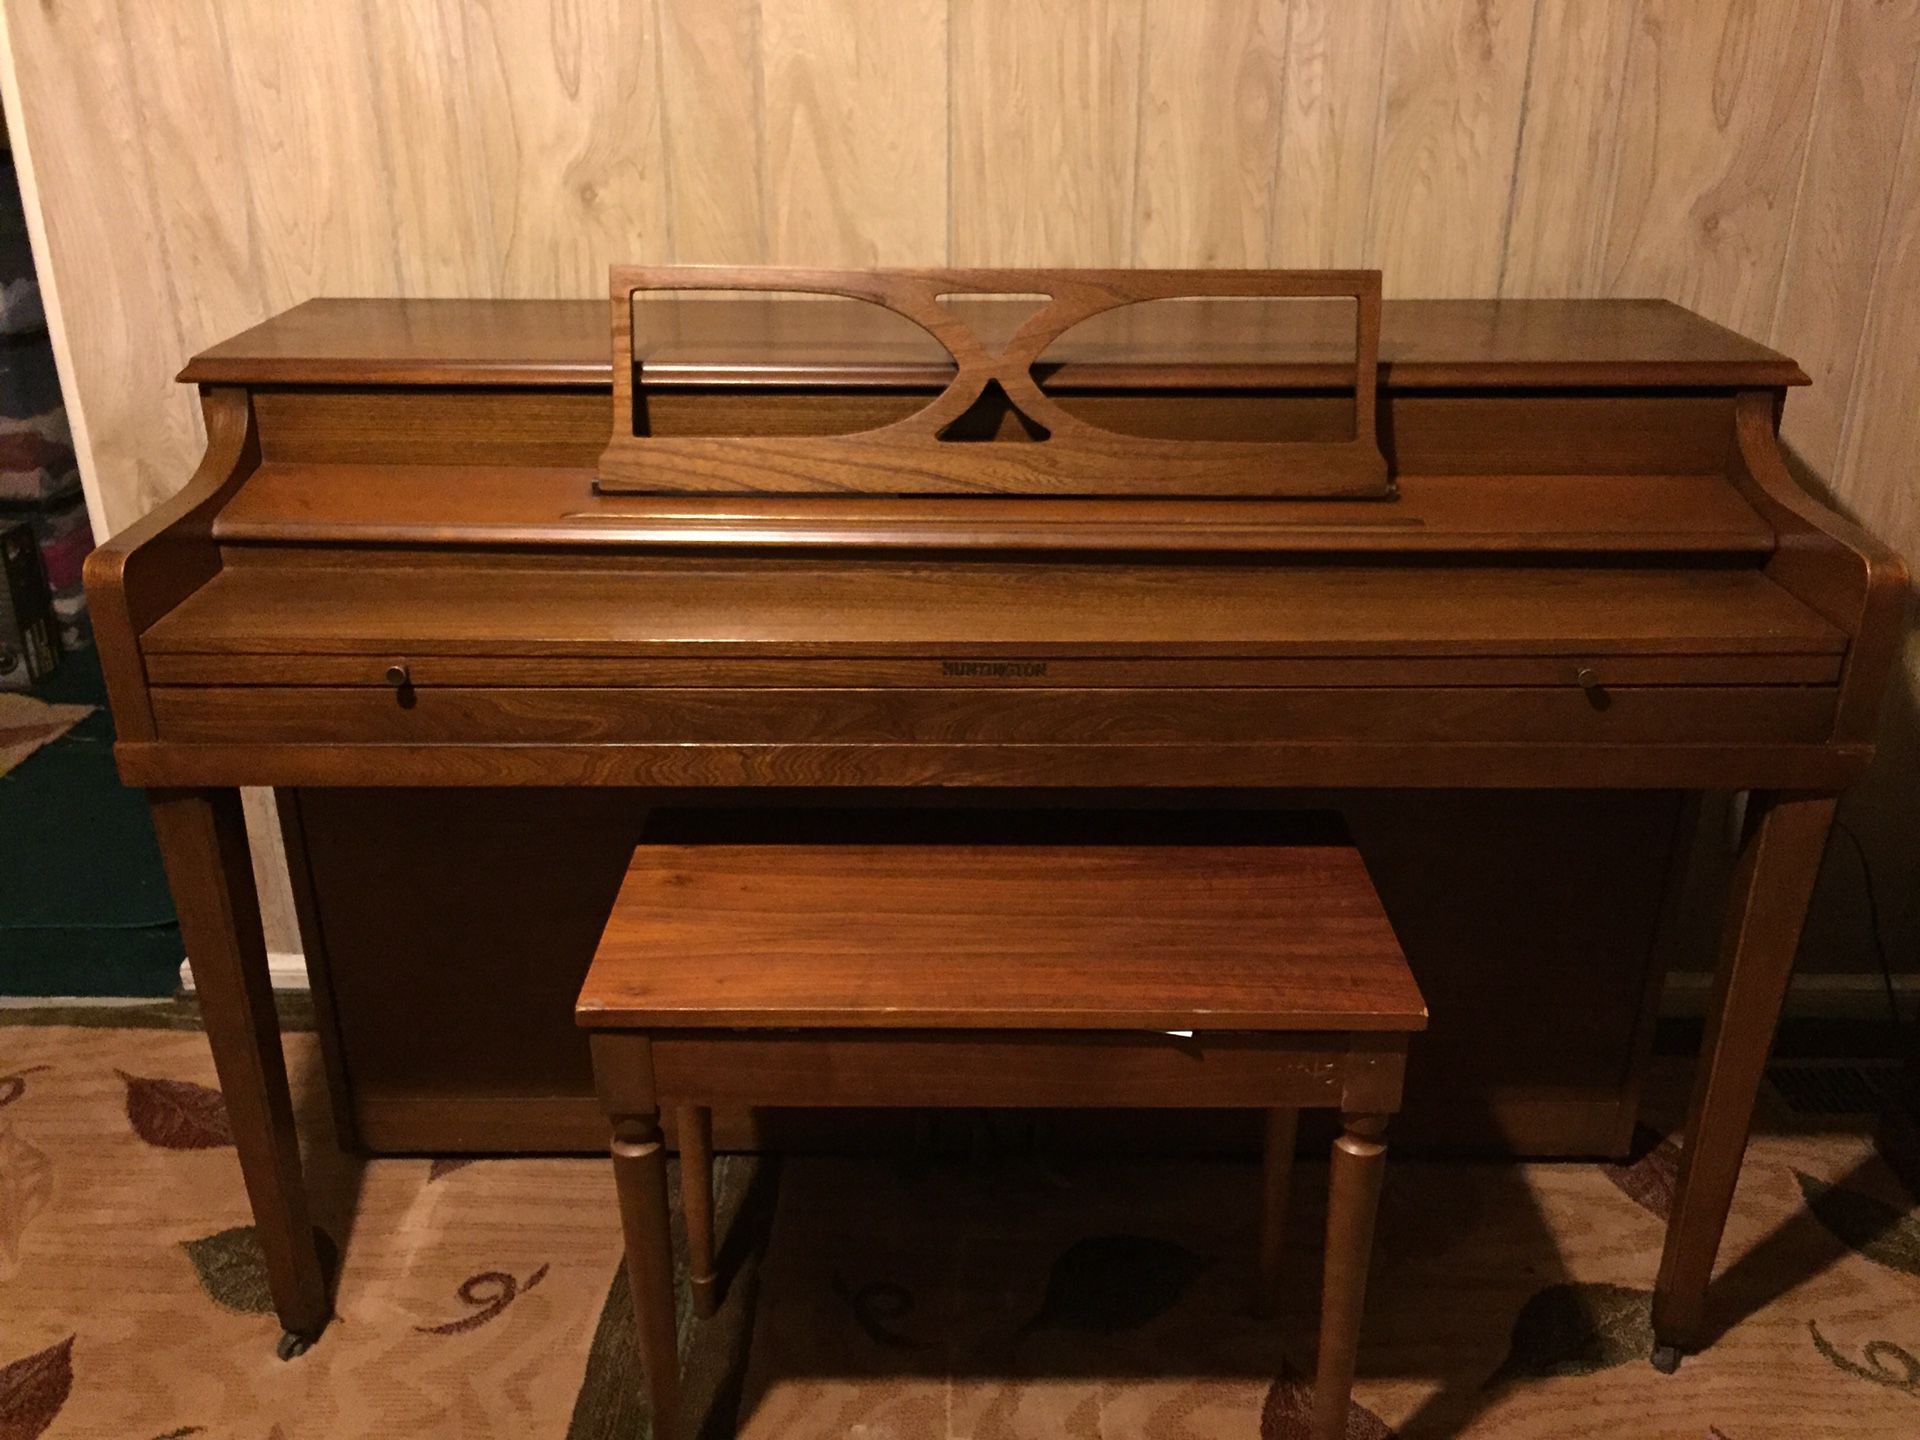 Must sale quickly. Huntington Piano for sale $80.